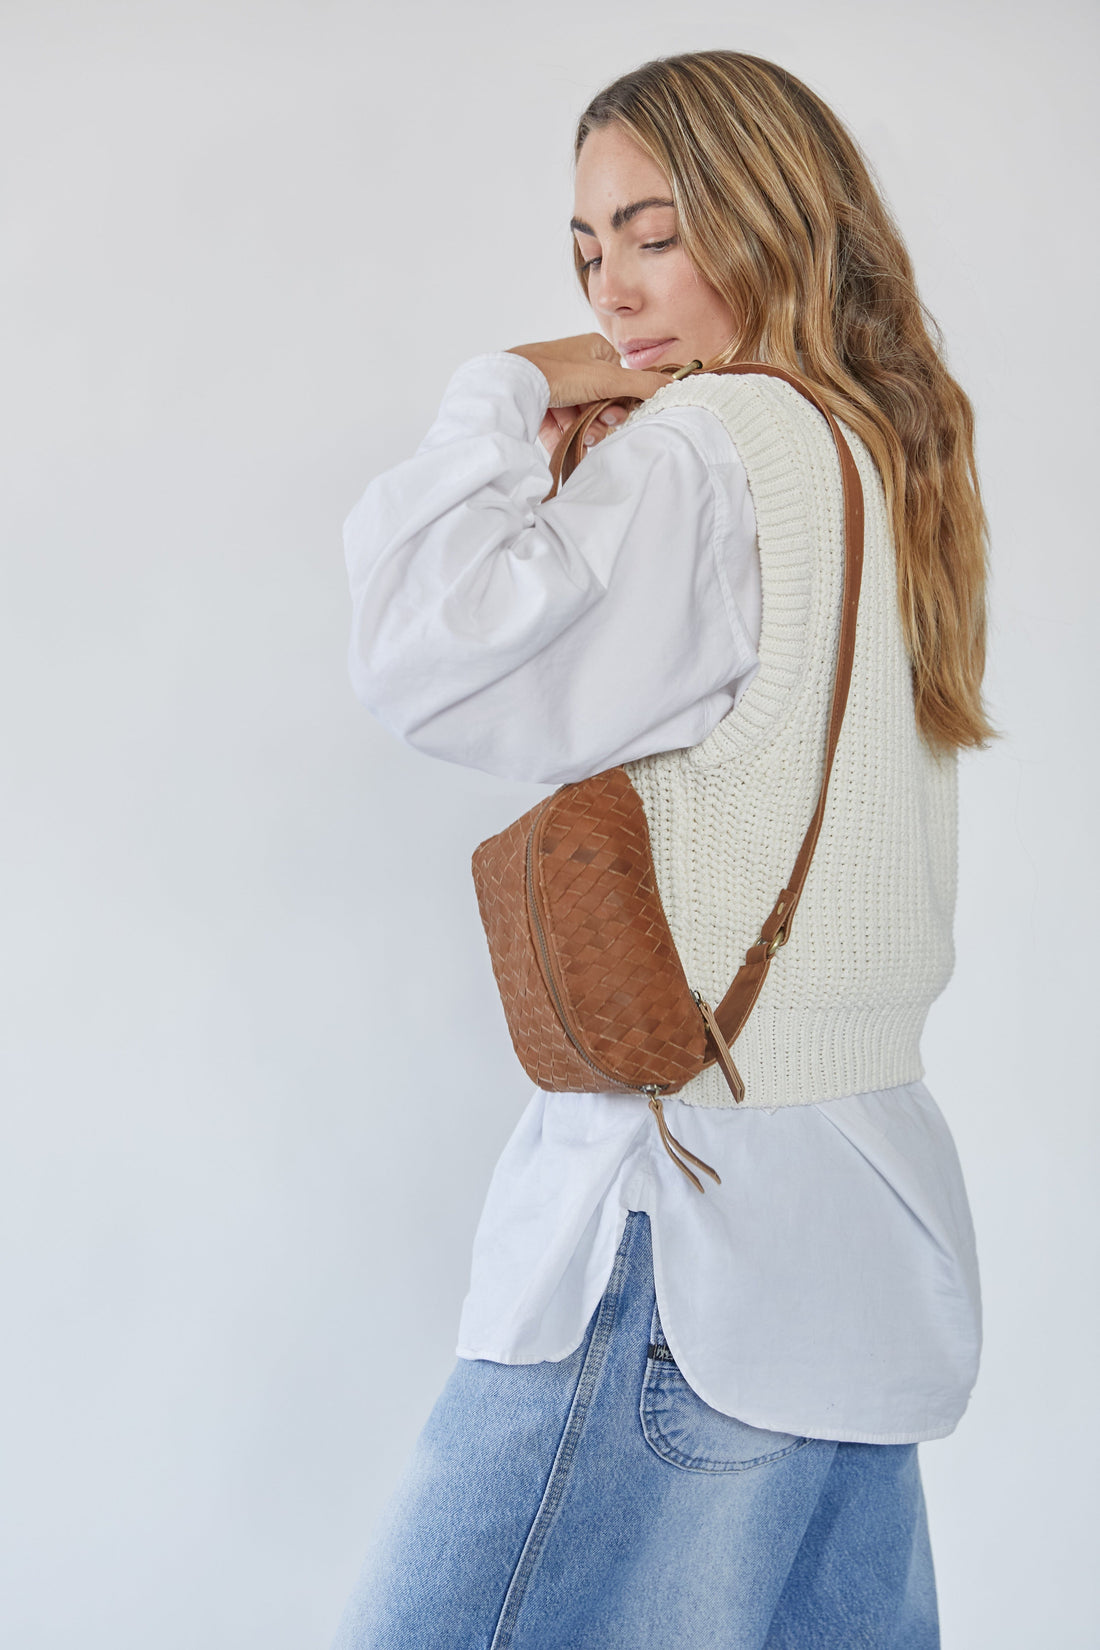 Mandrn Remy Woven - Tan Fanny Pack